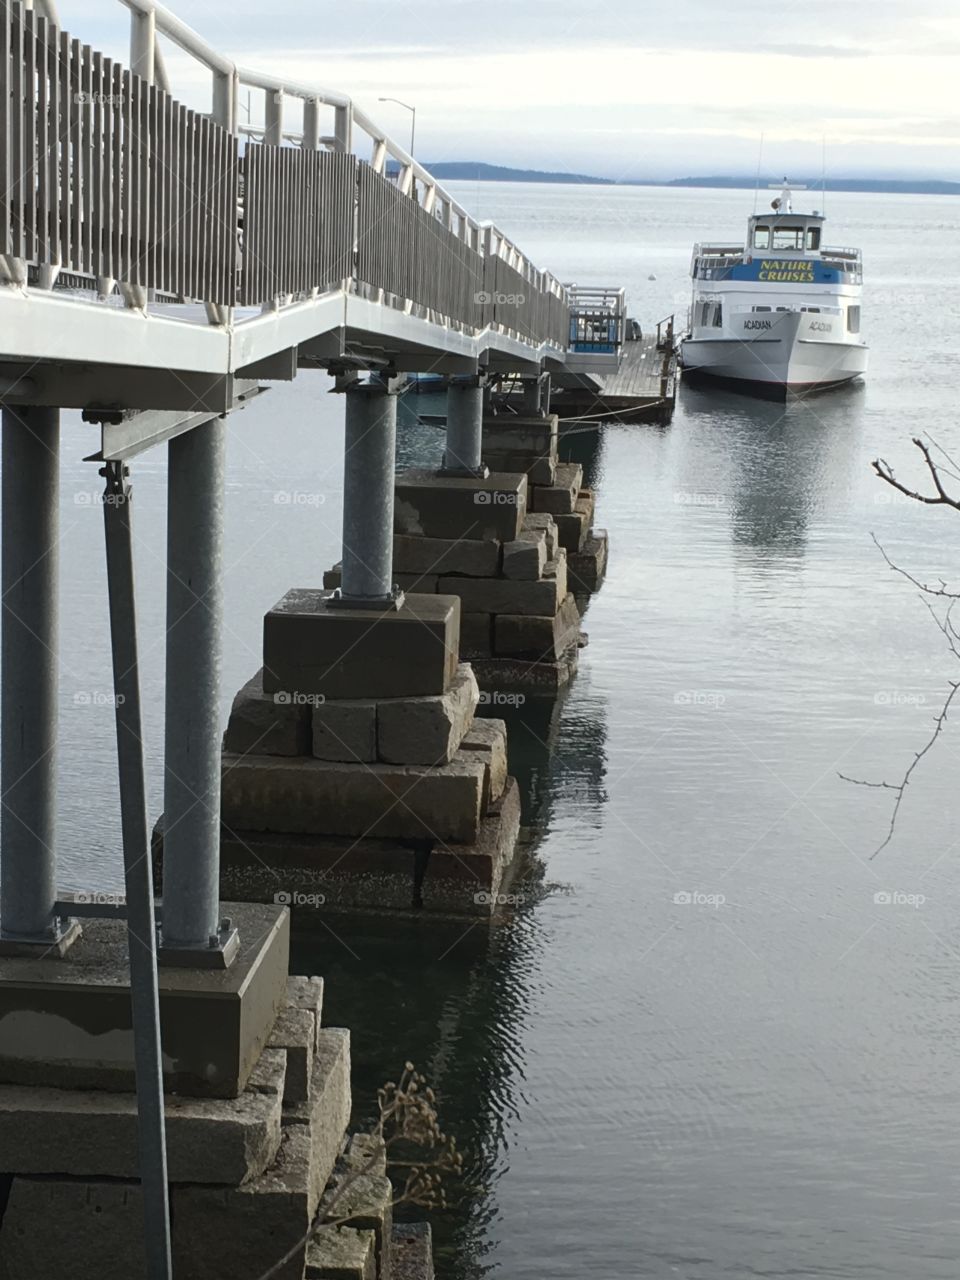 Walkway to the tour boat